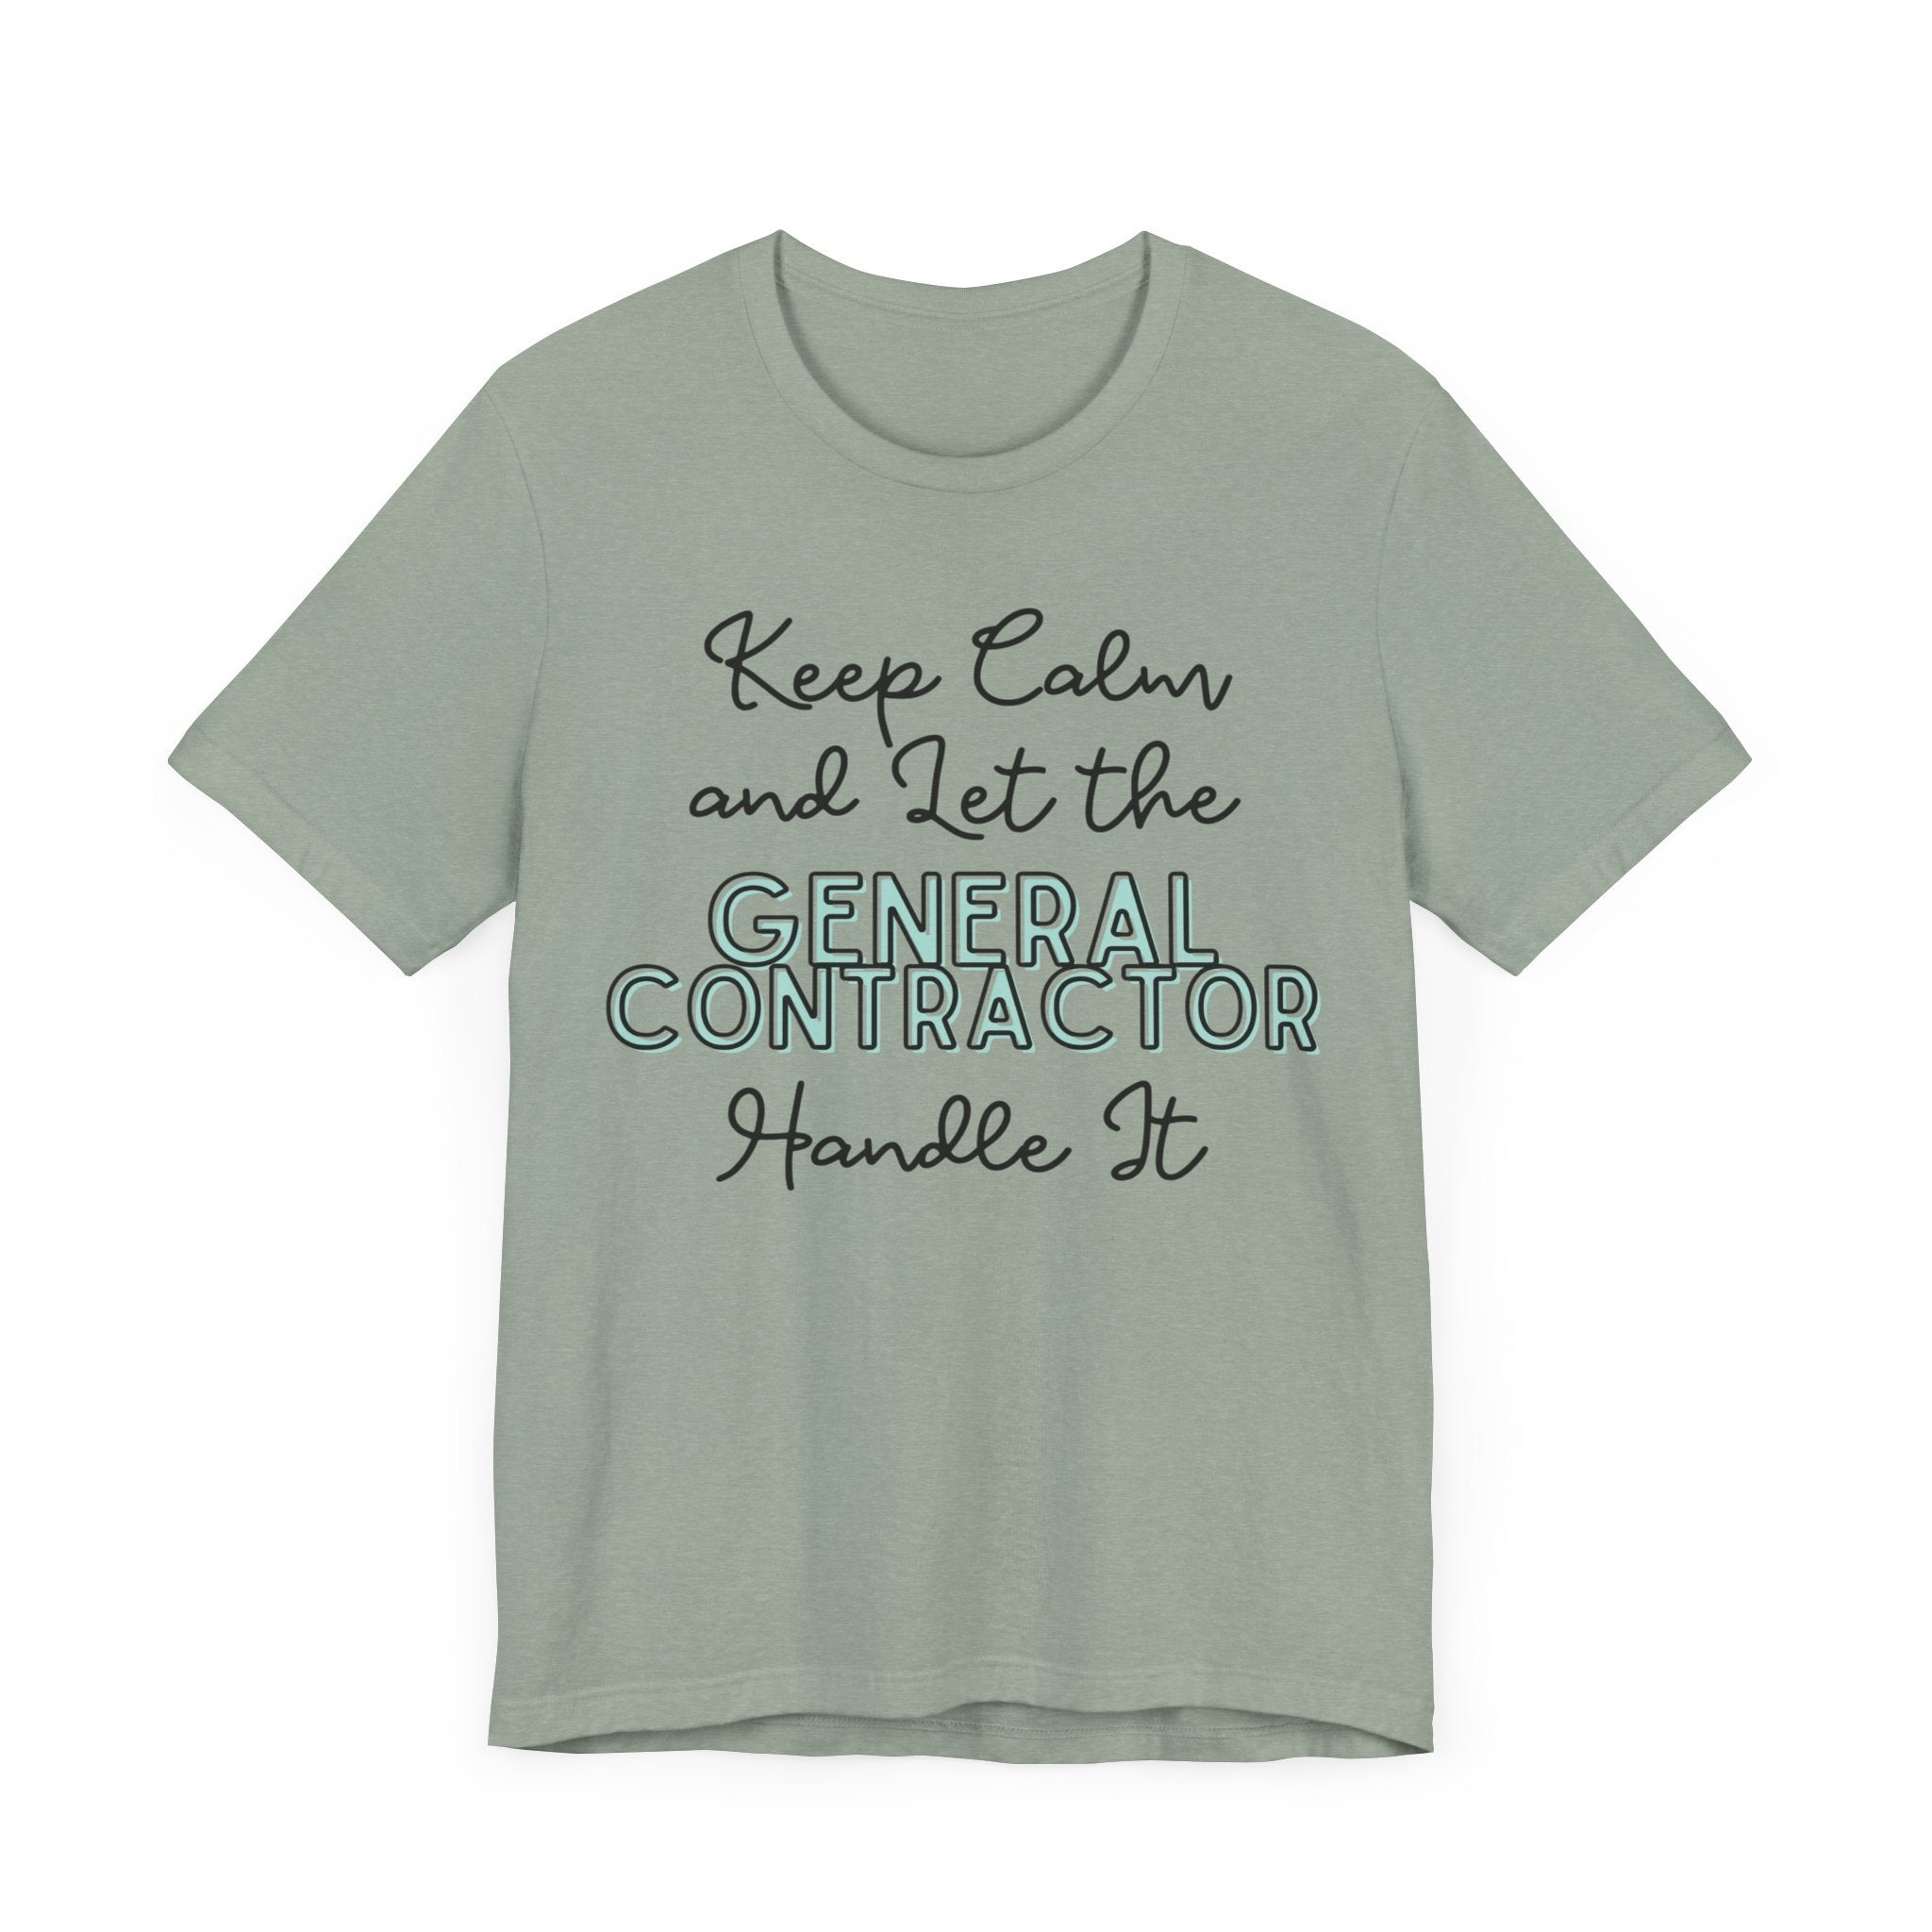 Keep Calm and let the General Contractor handle It - Jersey Short Sleeve Tee